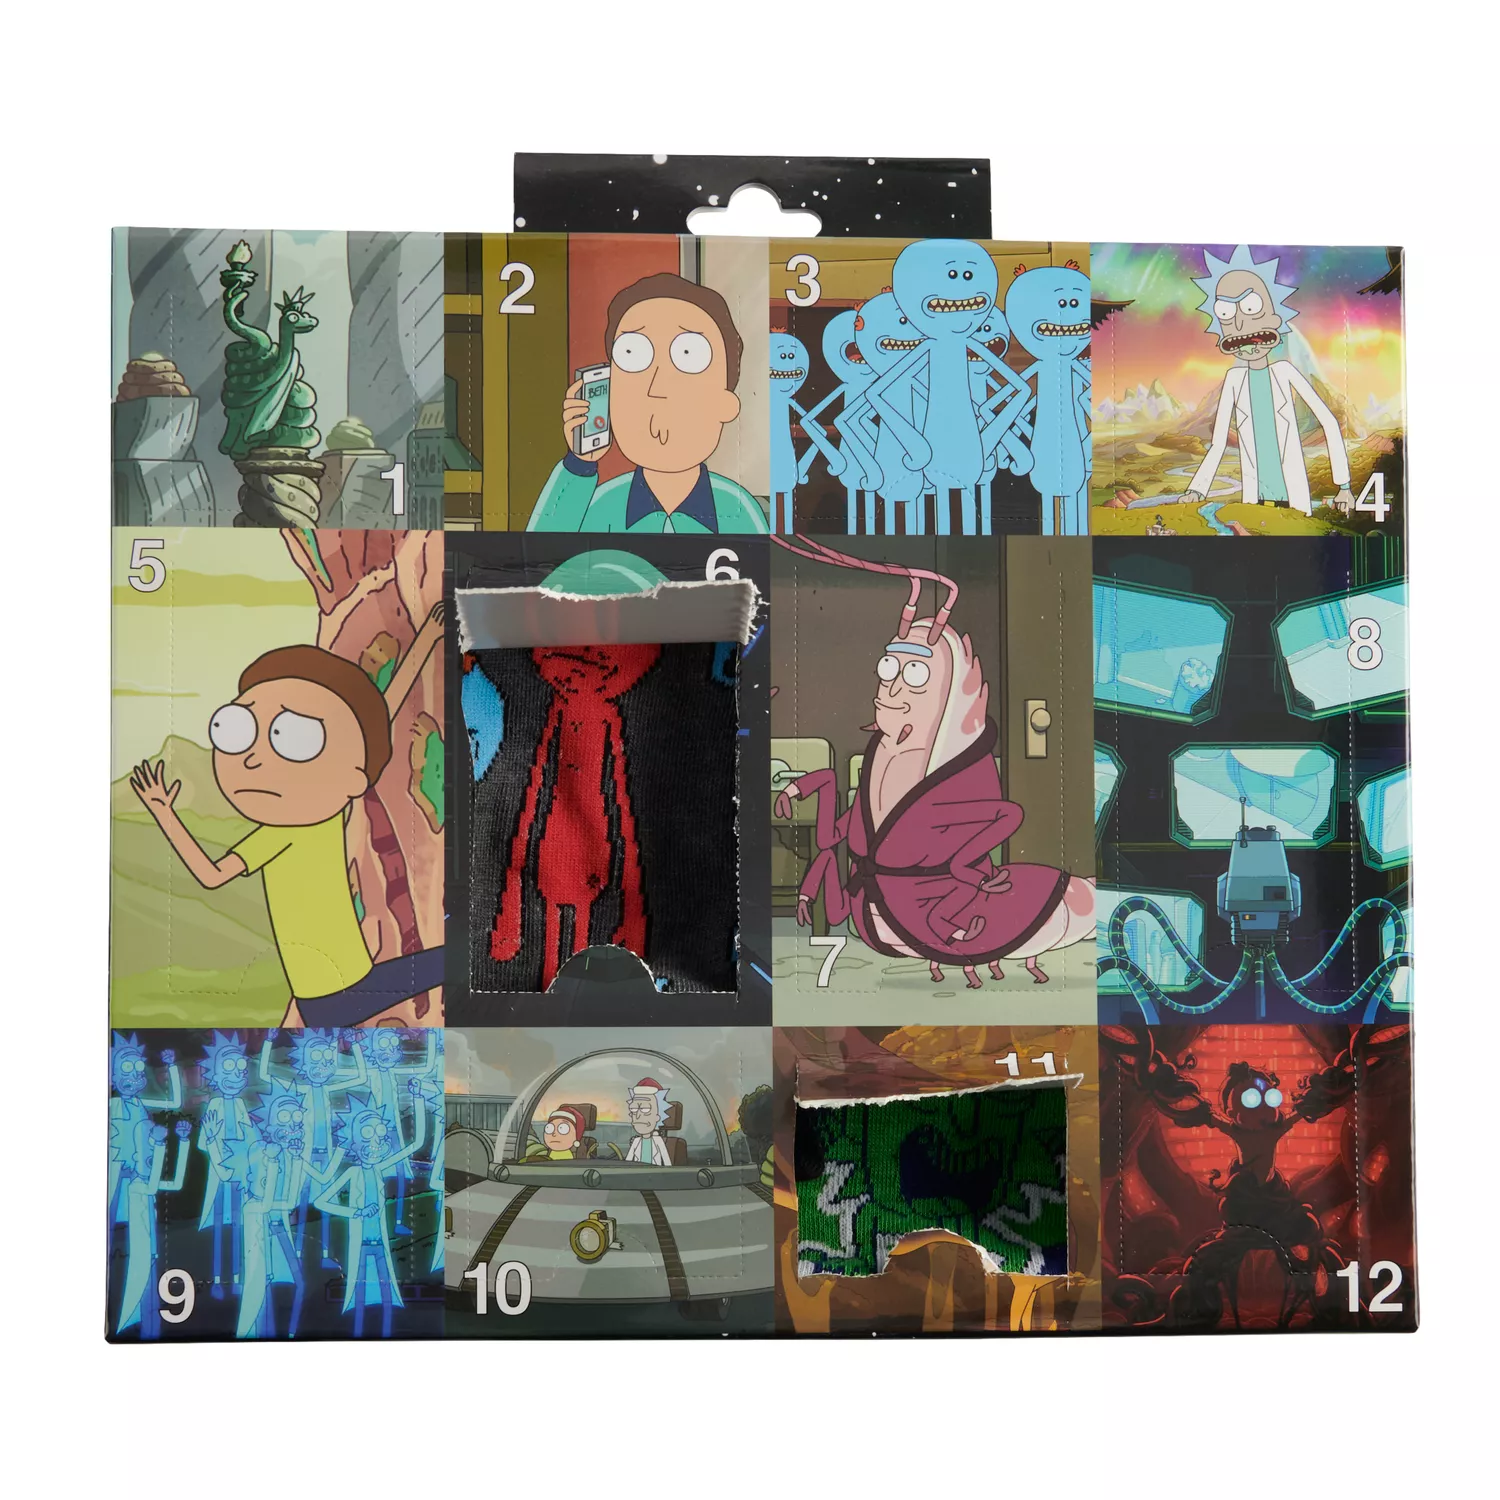 2020 Rick and Morty Socks Advent Calendar Available Now {Men s